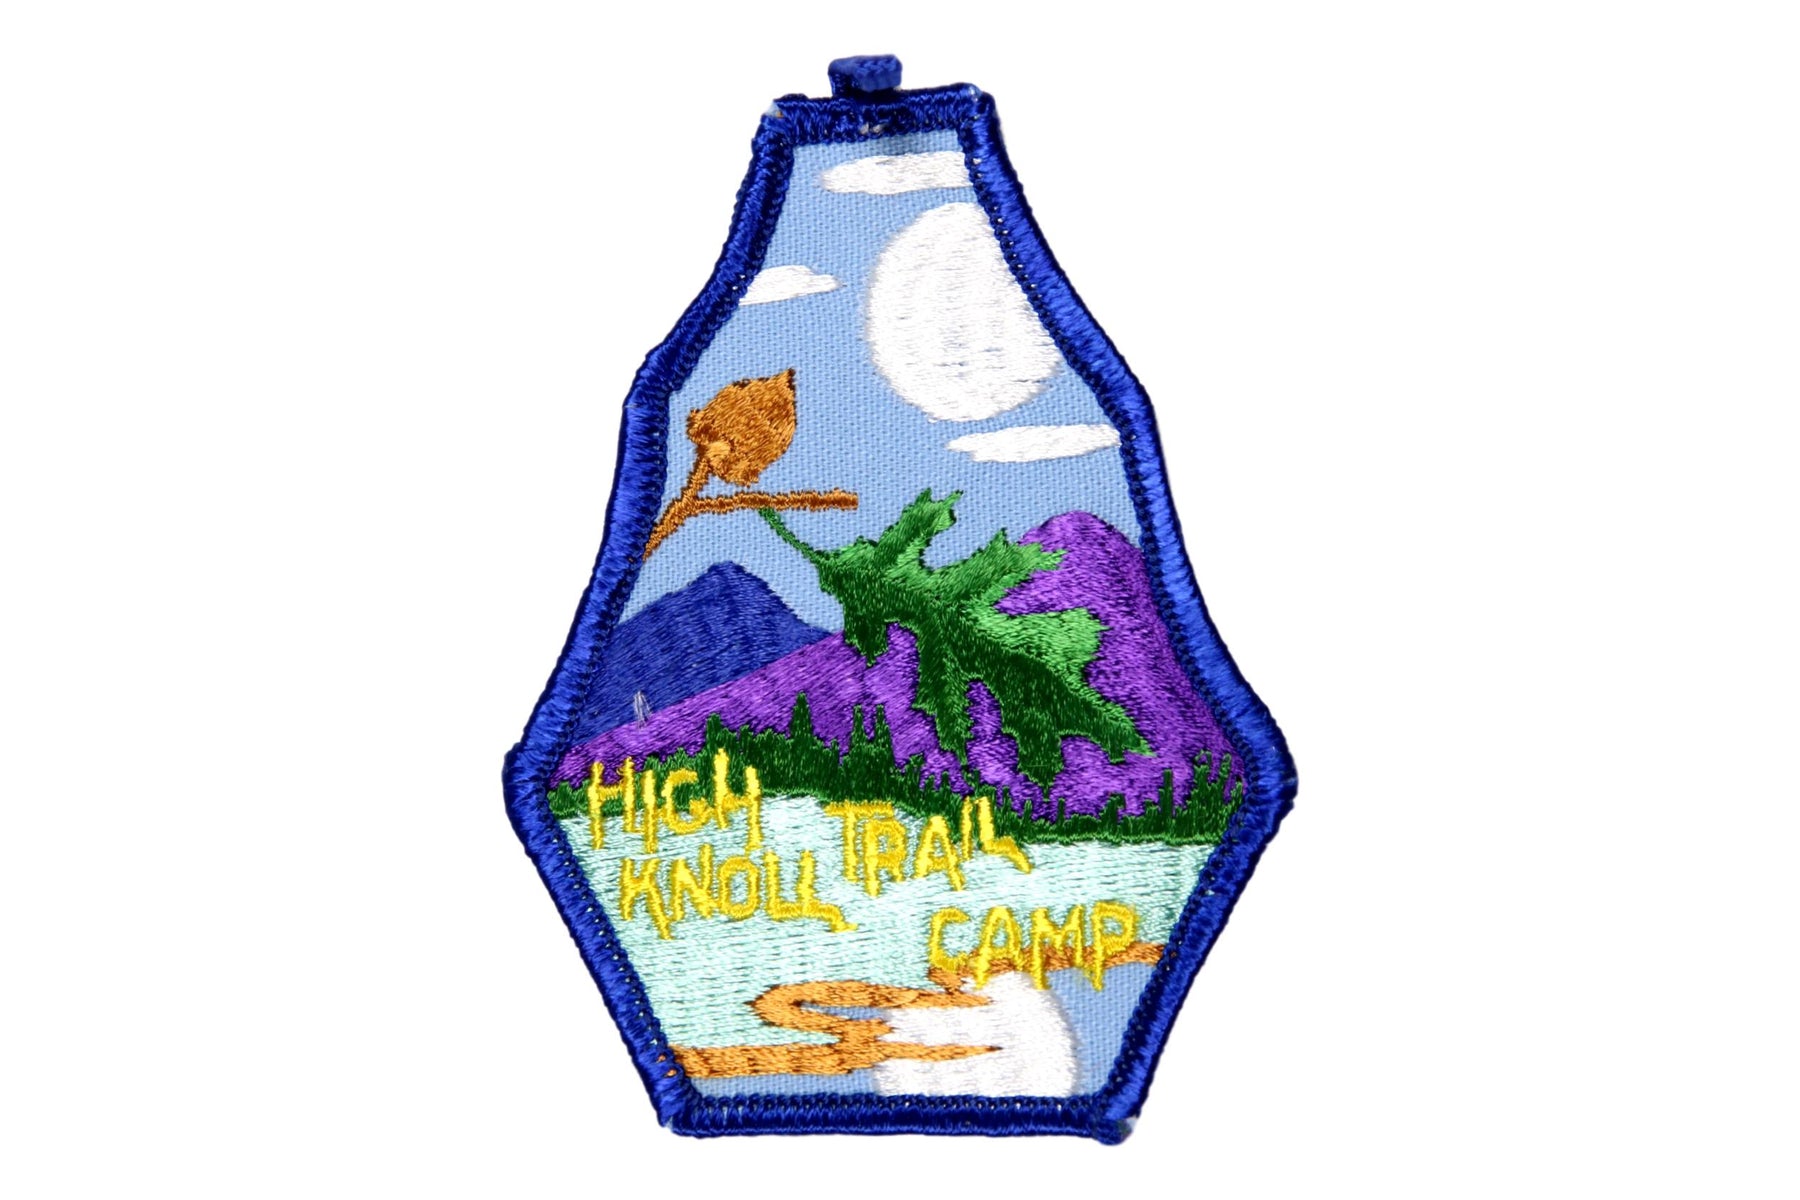 High Knoll Trail Camp Patch